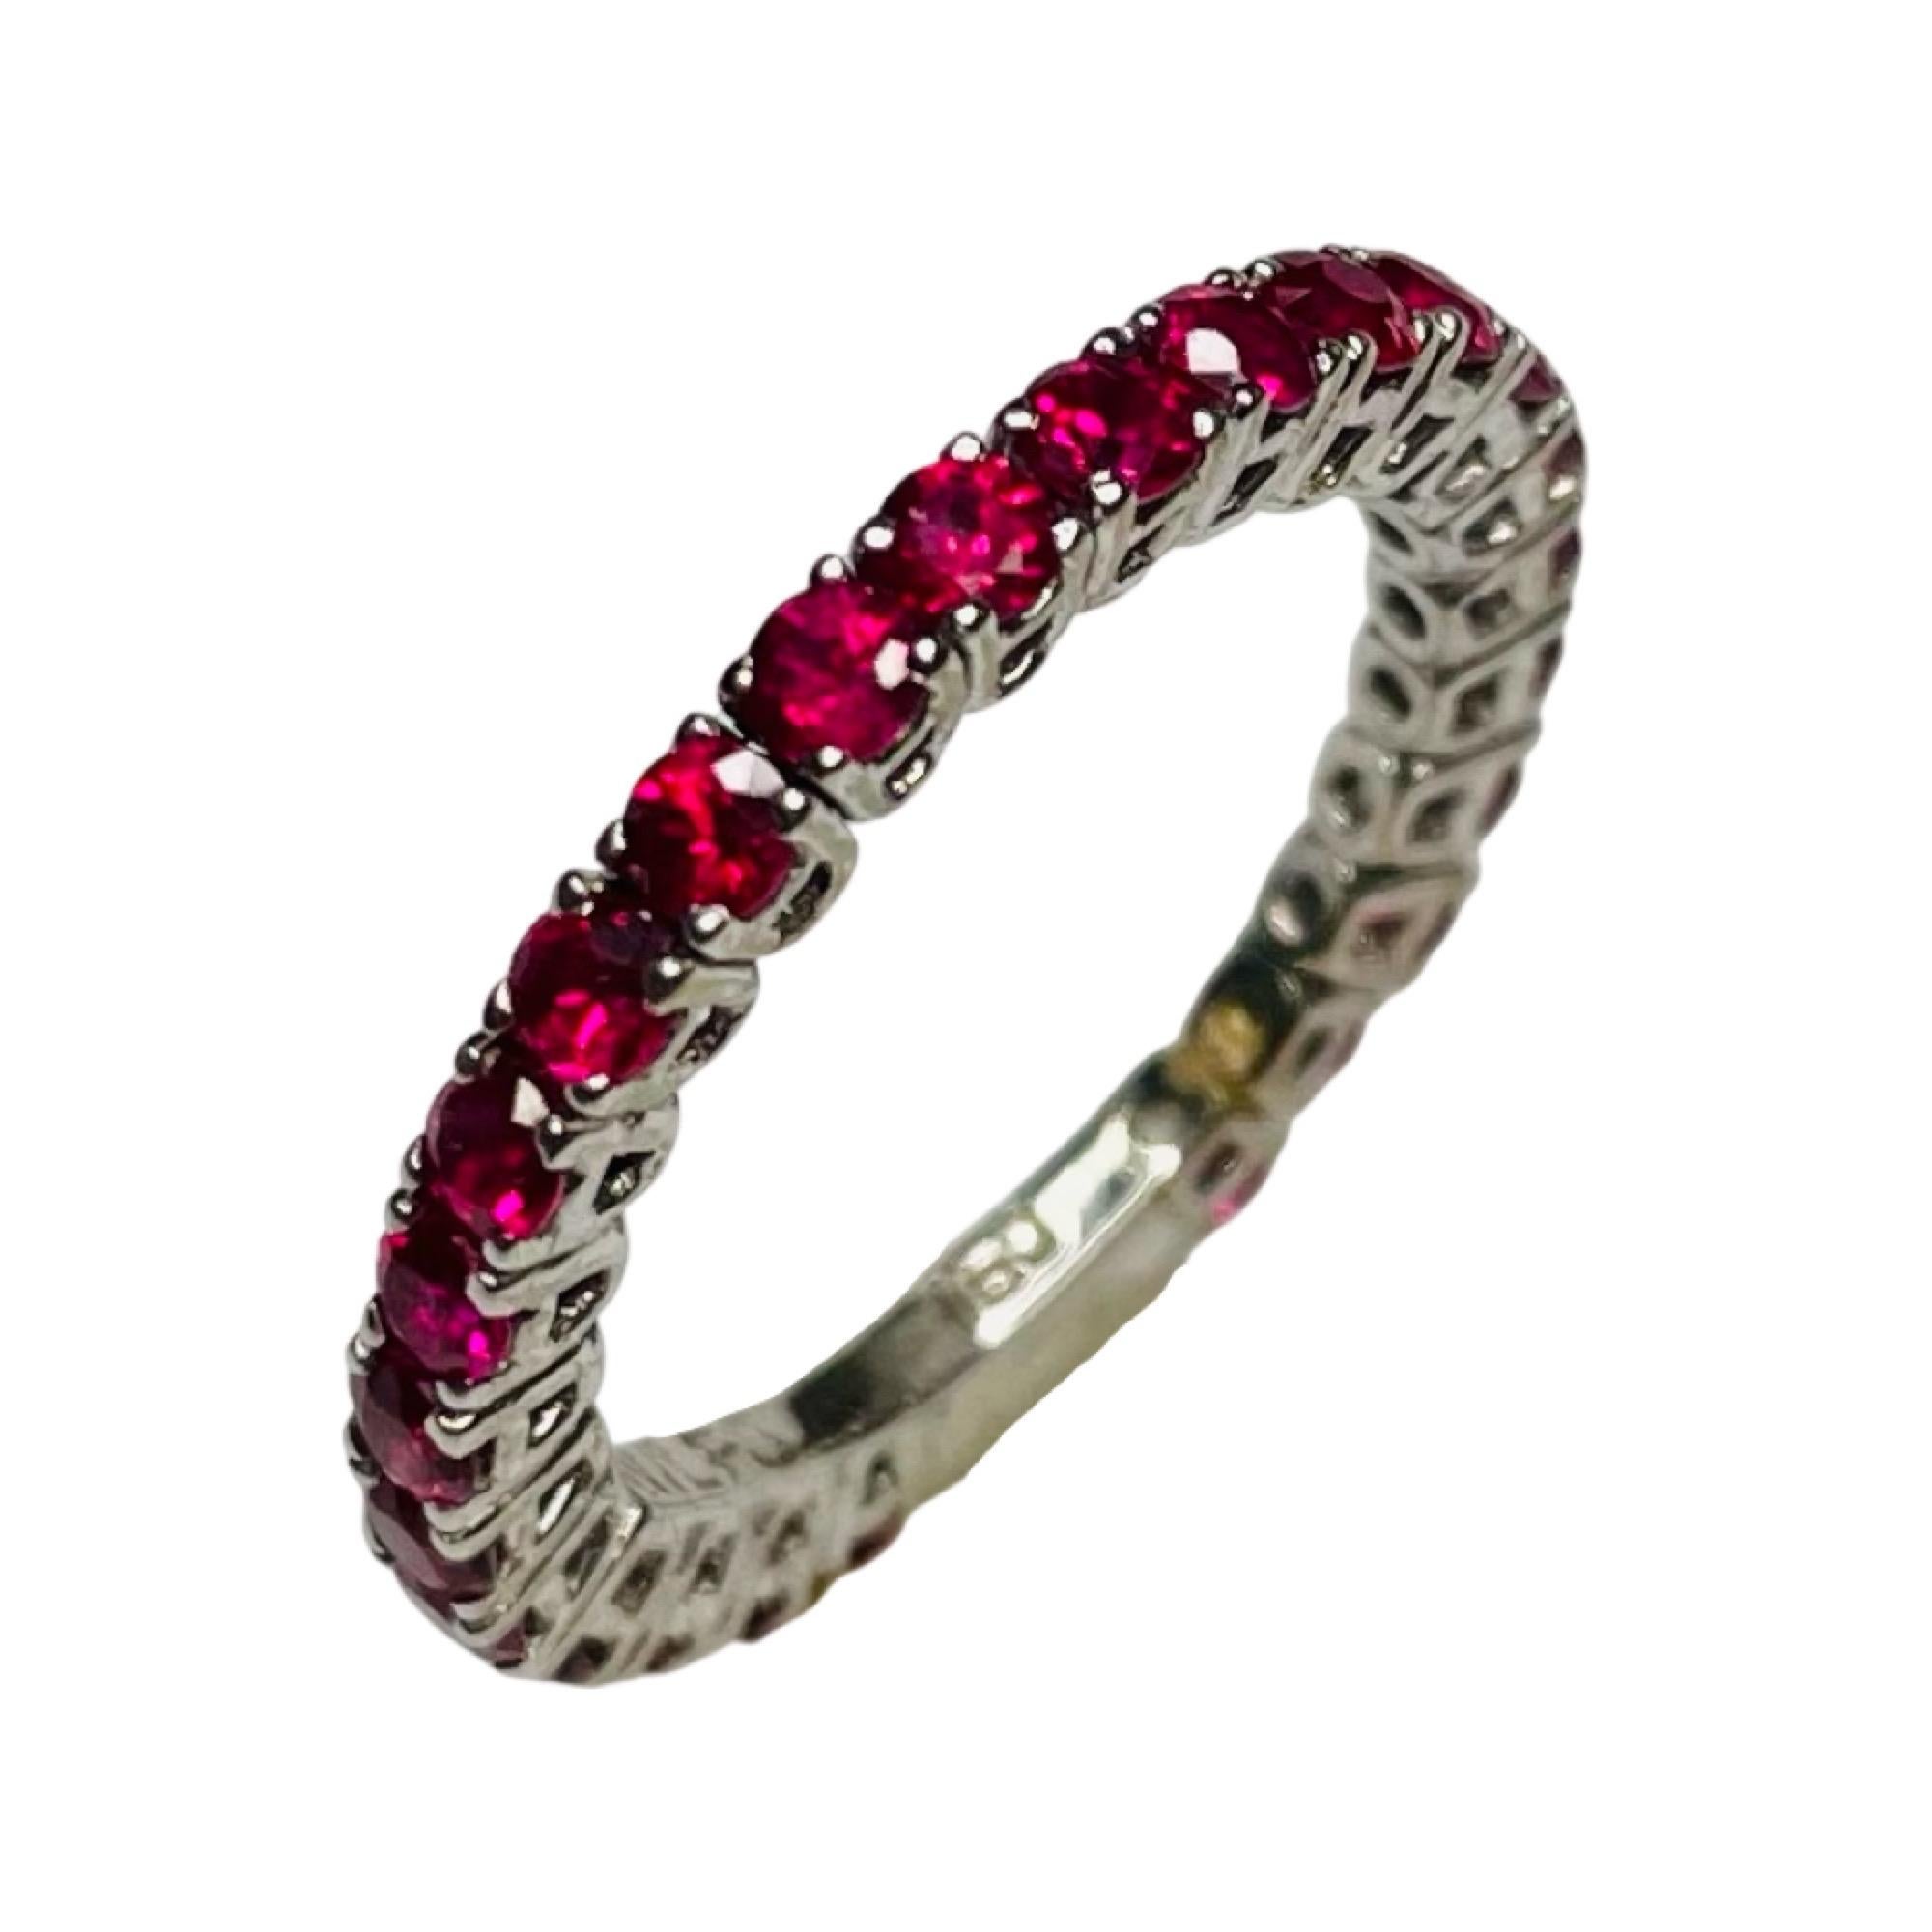 William Levine Fine Jewels 18K White Gold Natural Ruby Ring. There are 25, diamond cut Rubies weighing 1.59 carats. They are prong set. The ring is 2.2 mm wide. The ring is finger size 6 but can be sized for an additional fee. 
100-50-895